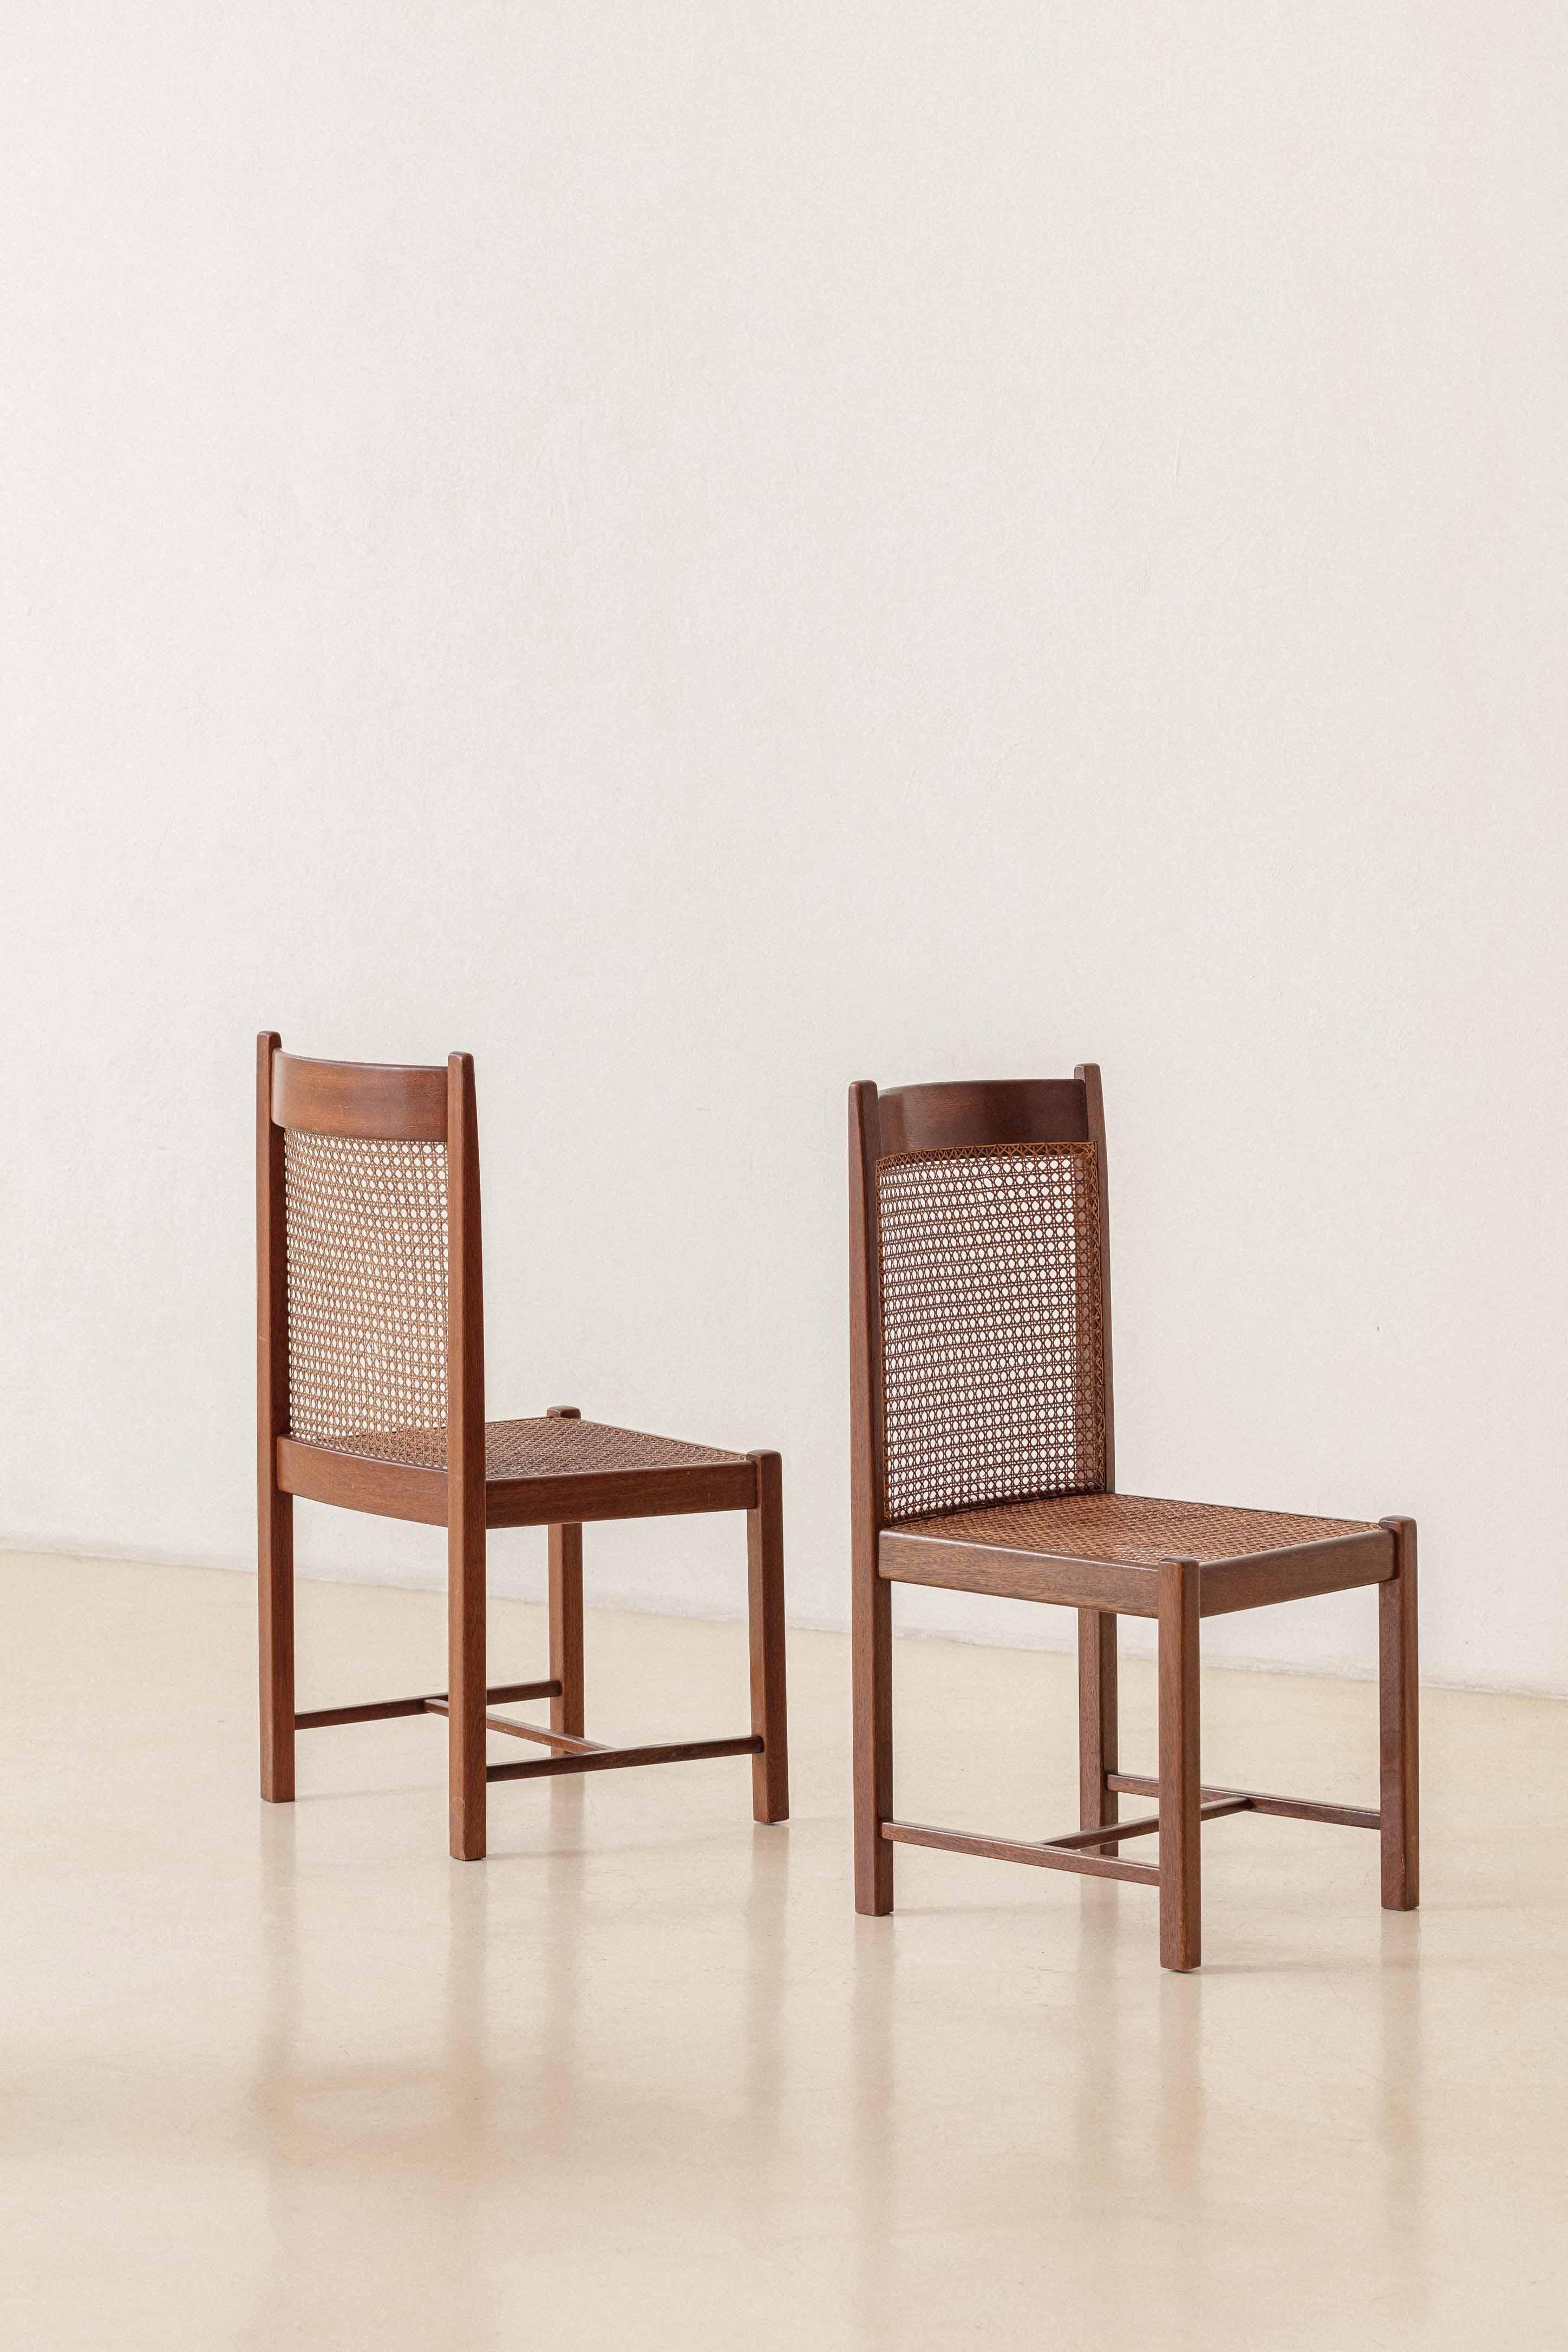 Brazilian Rosewood Dining Chairs by Fatima Arquitetura Interiores 'FAI', 1960s In Good Condition For Sale In New York, NY